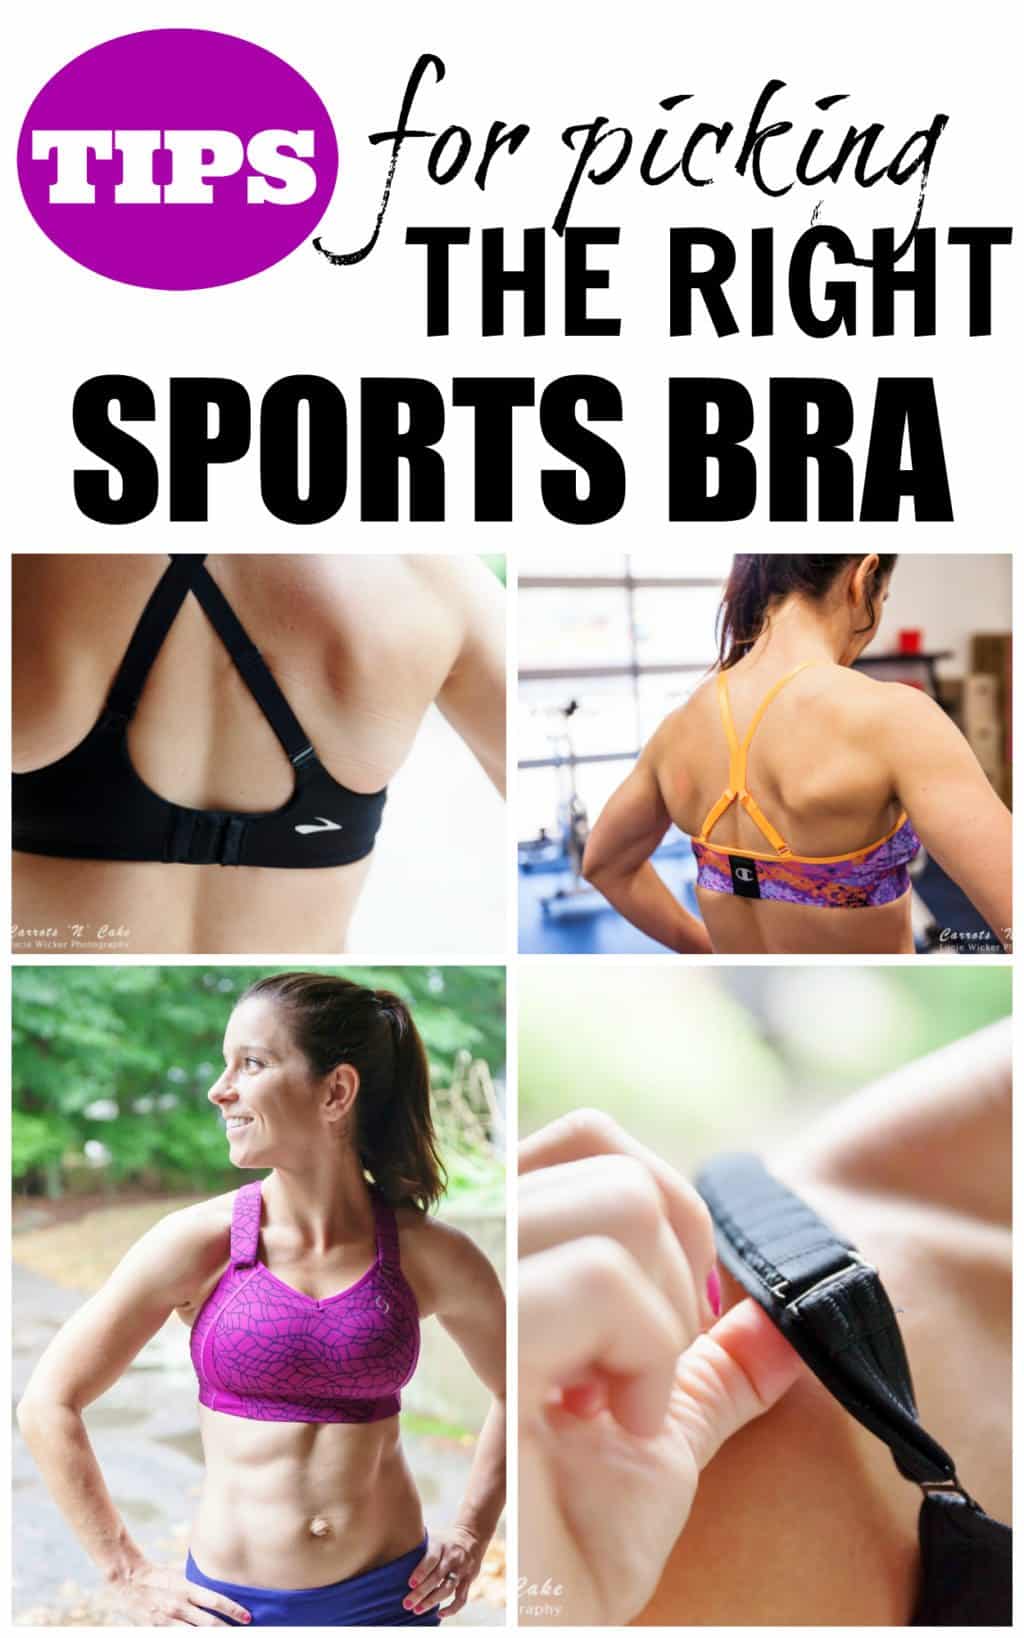 TIPS FOR PICKING THE RIGHT SPORTS BRA